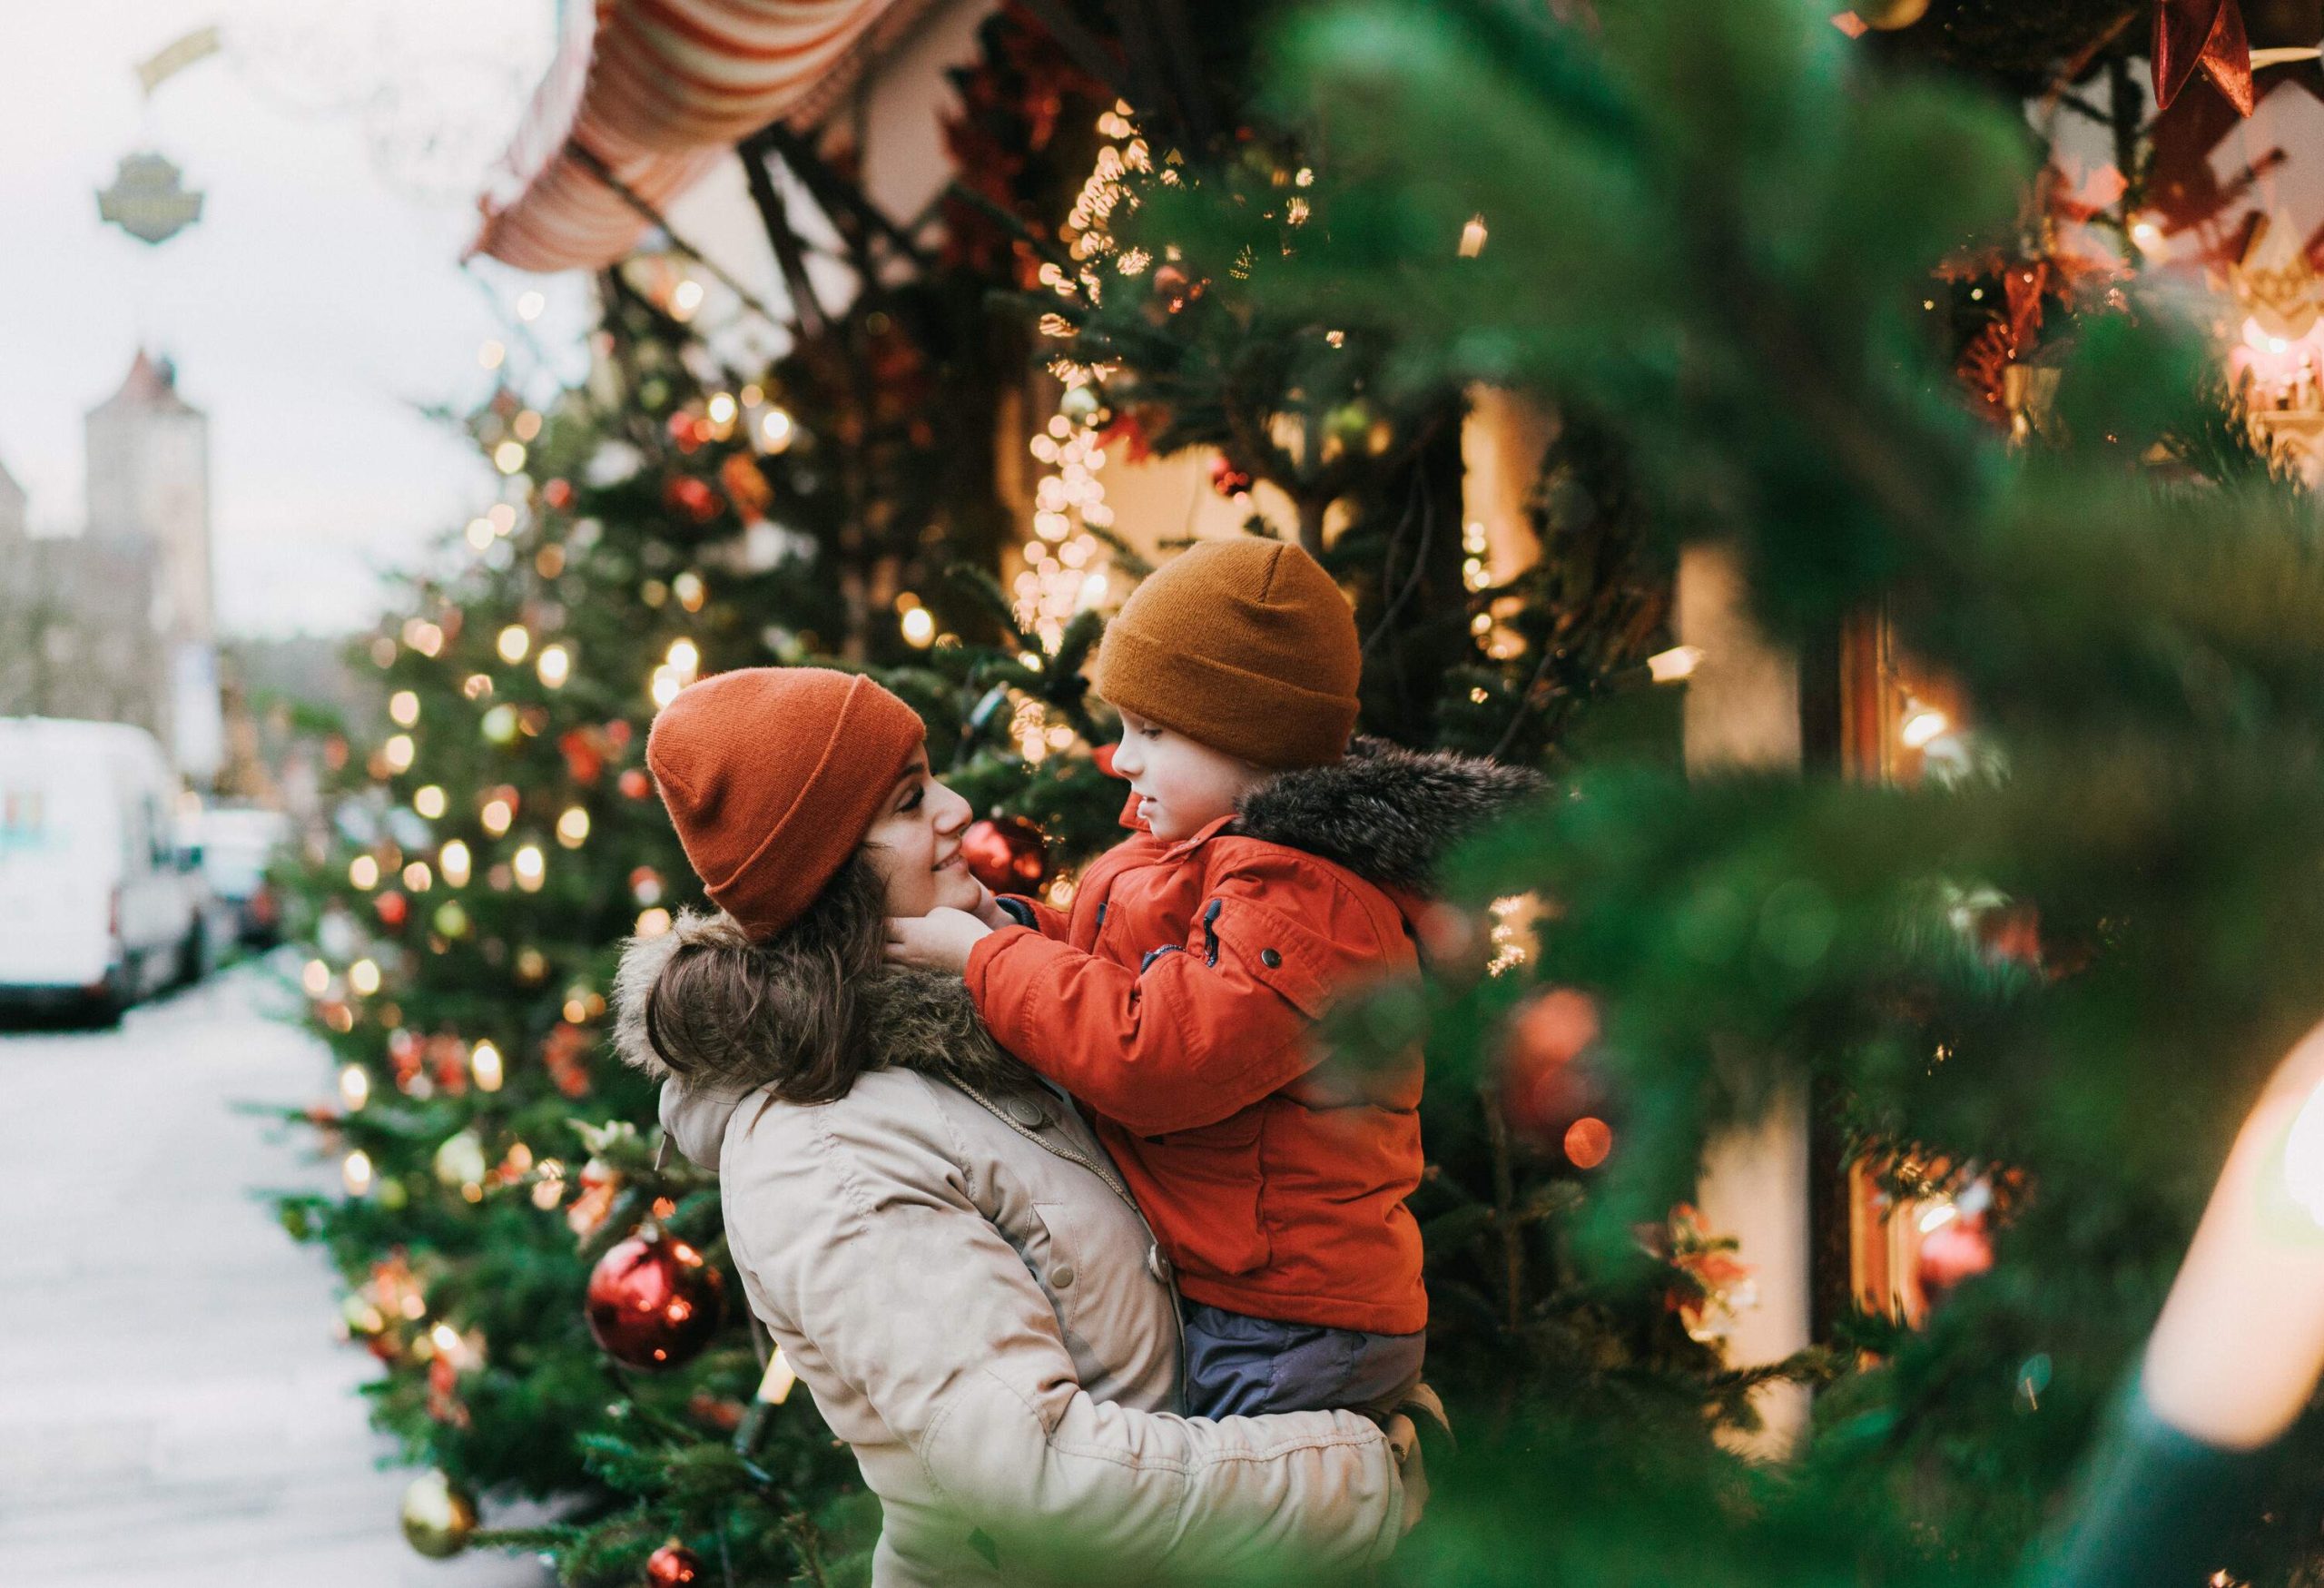 A mother and son in winter clothing standing next to a Christmas tree.